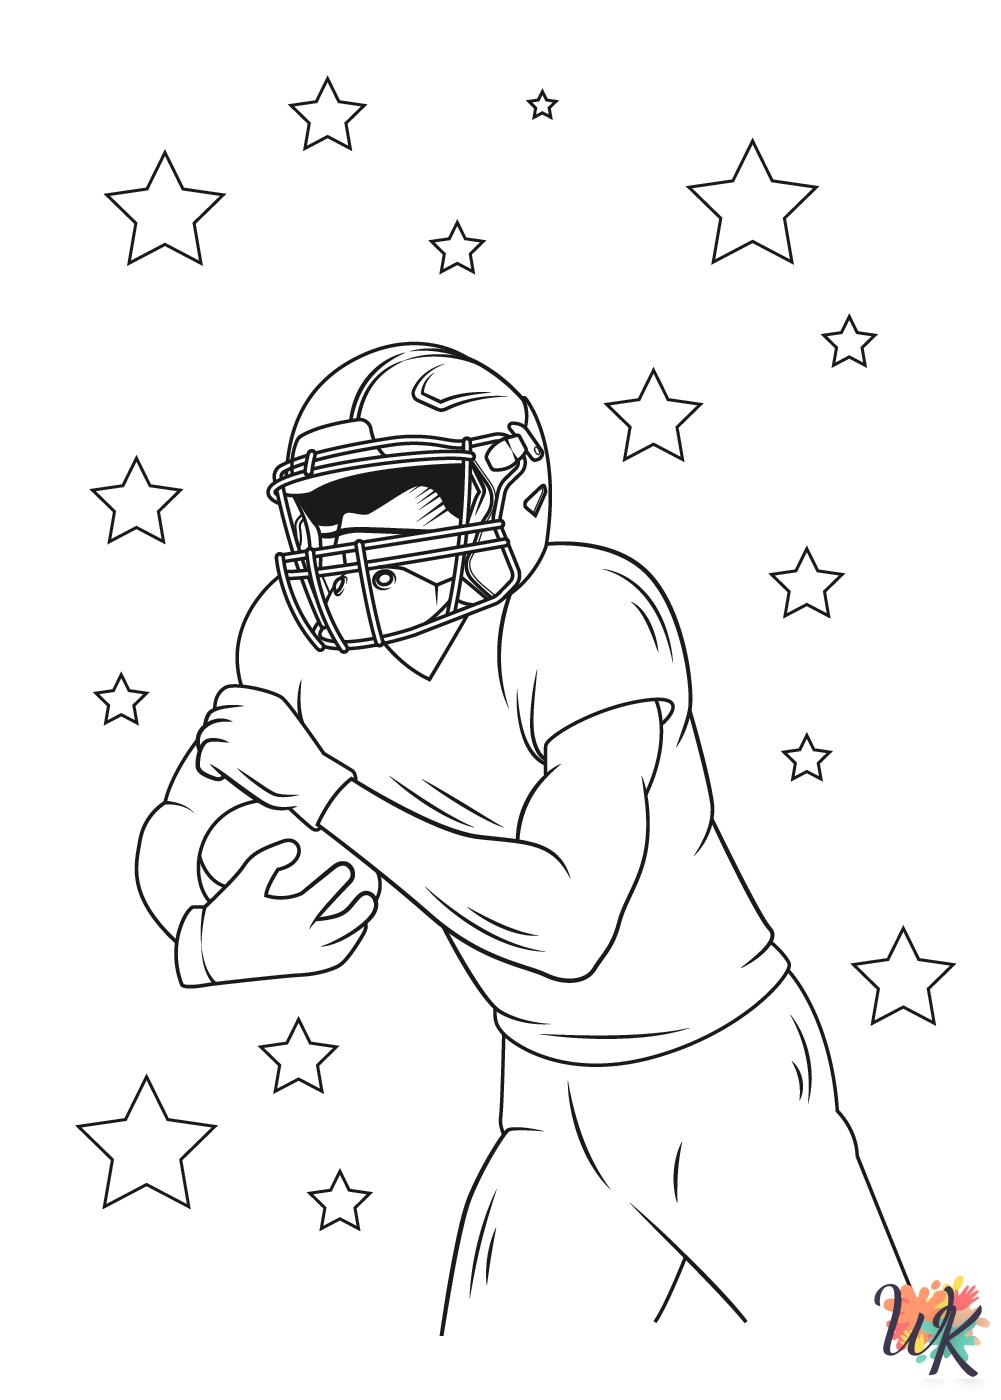 NFL coloring pages for adults easy